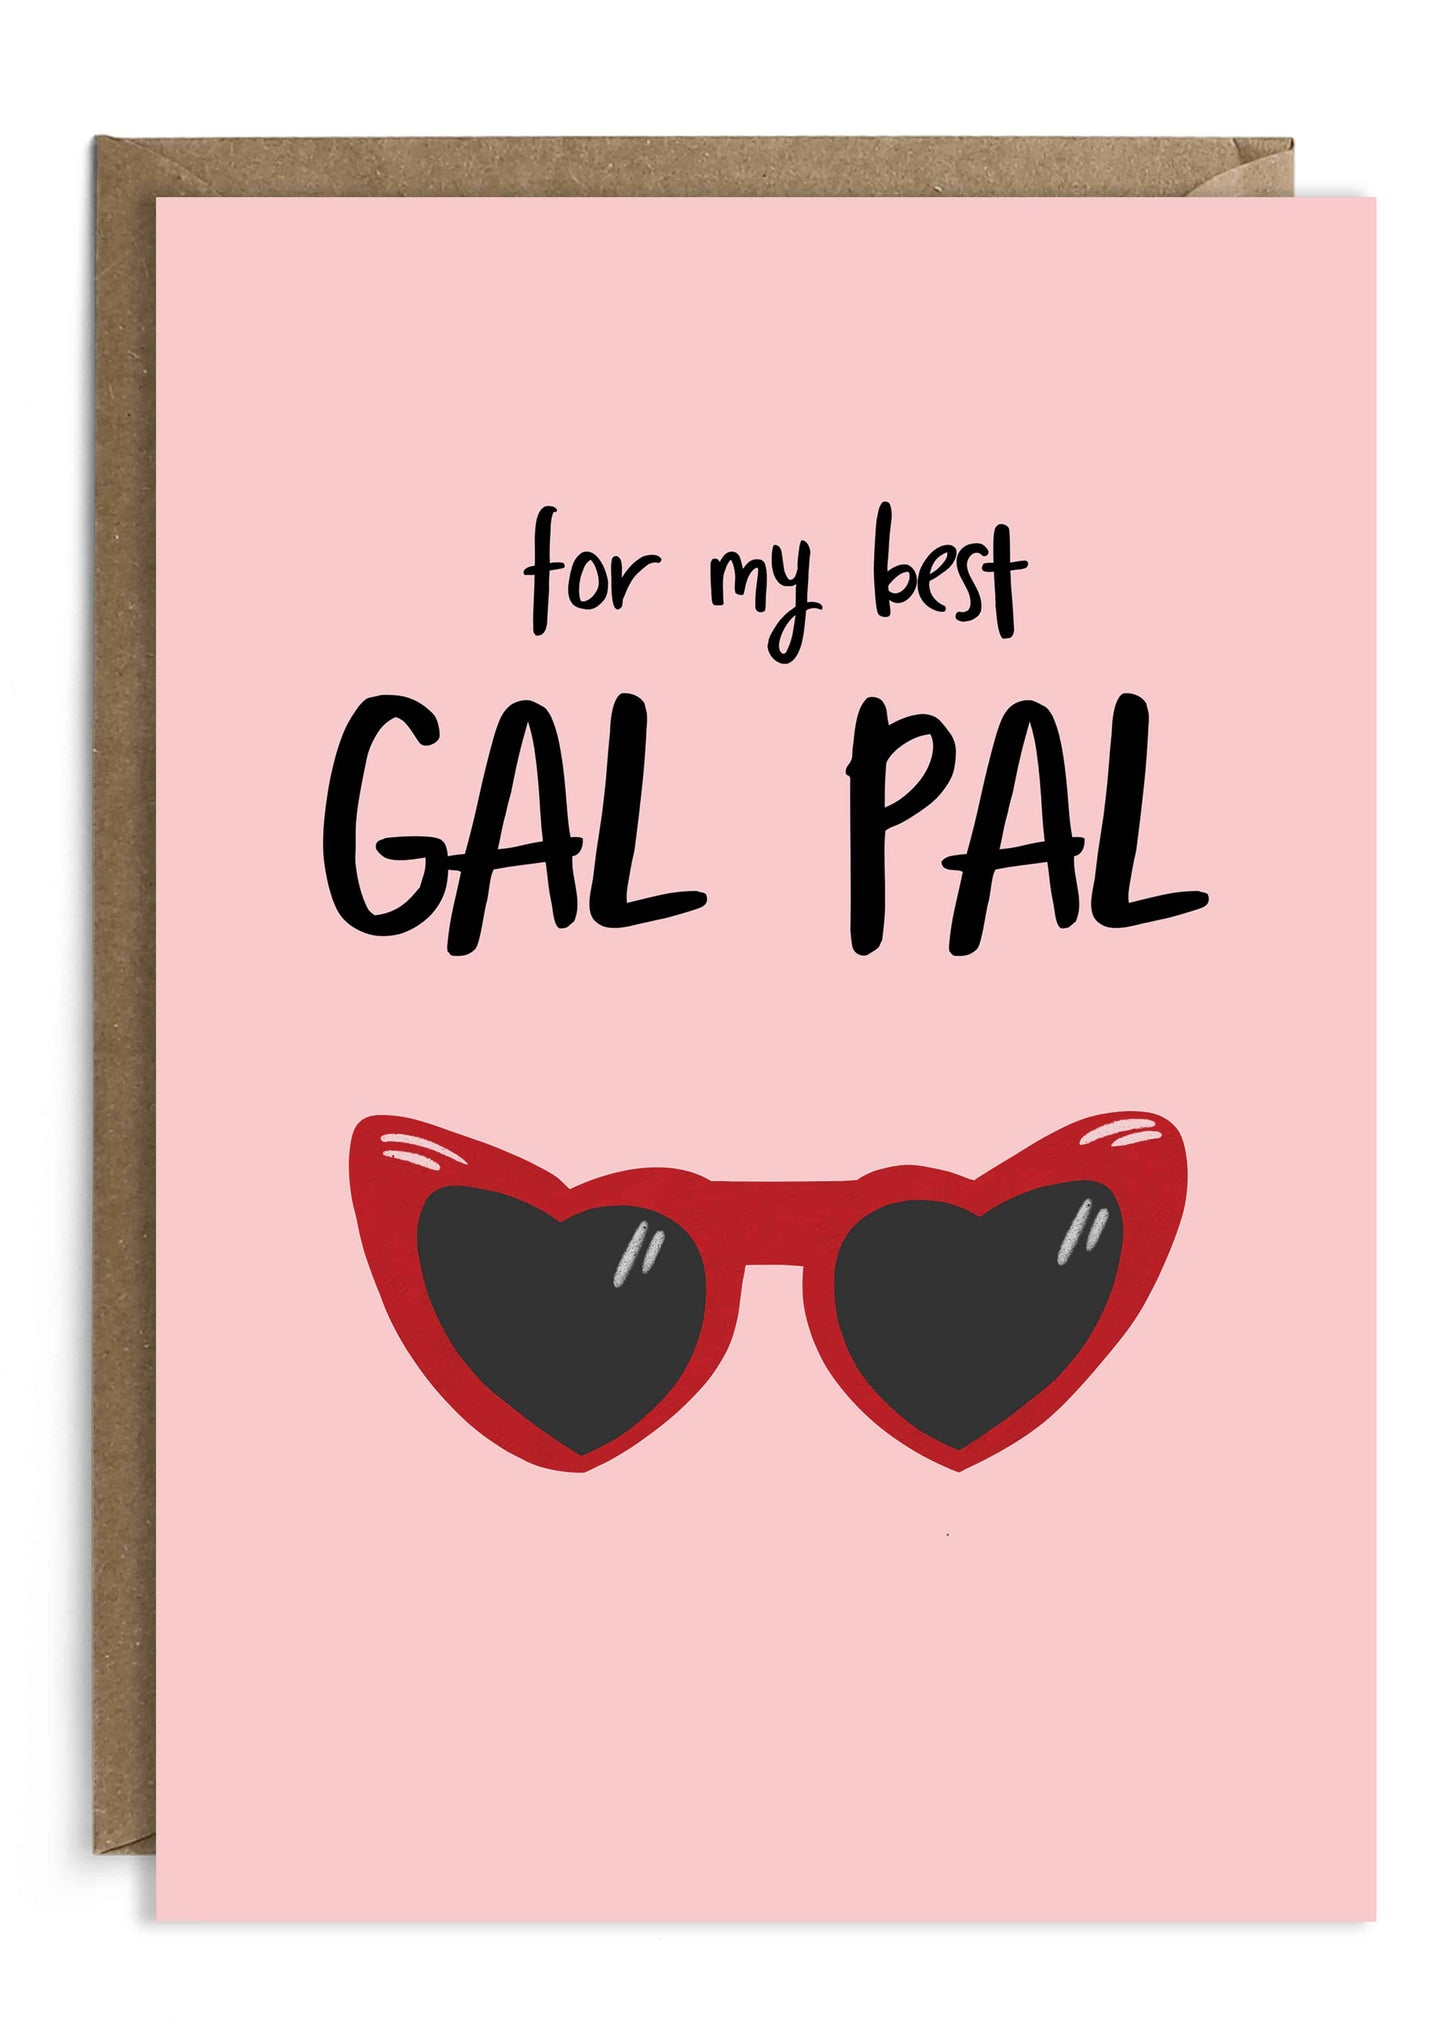 For My Best Gal Pal - Card for Best Friend